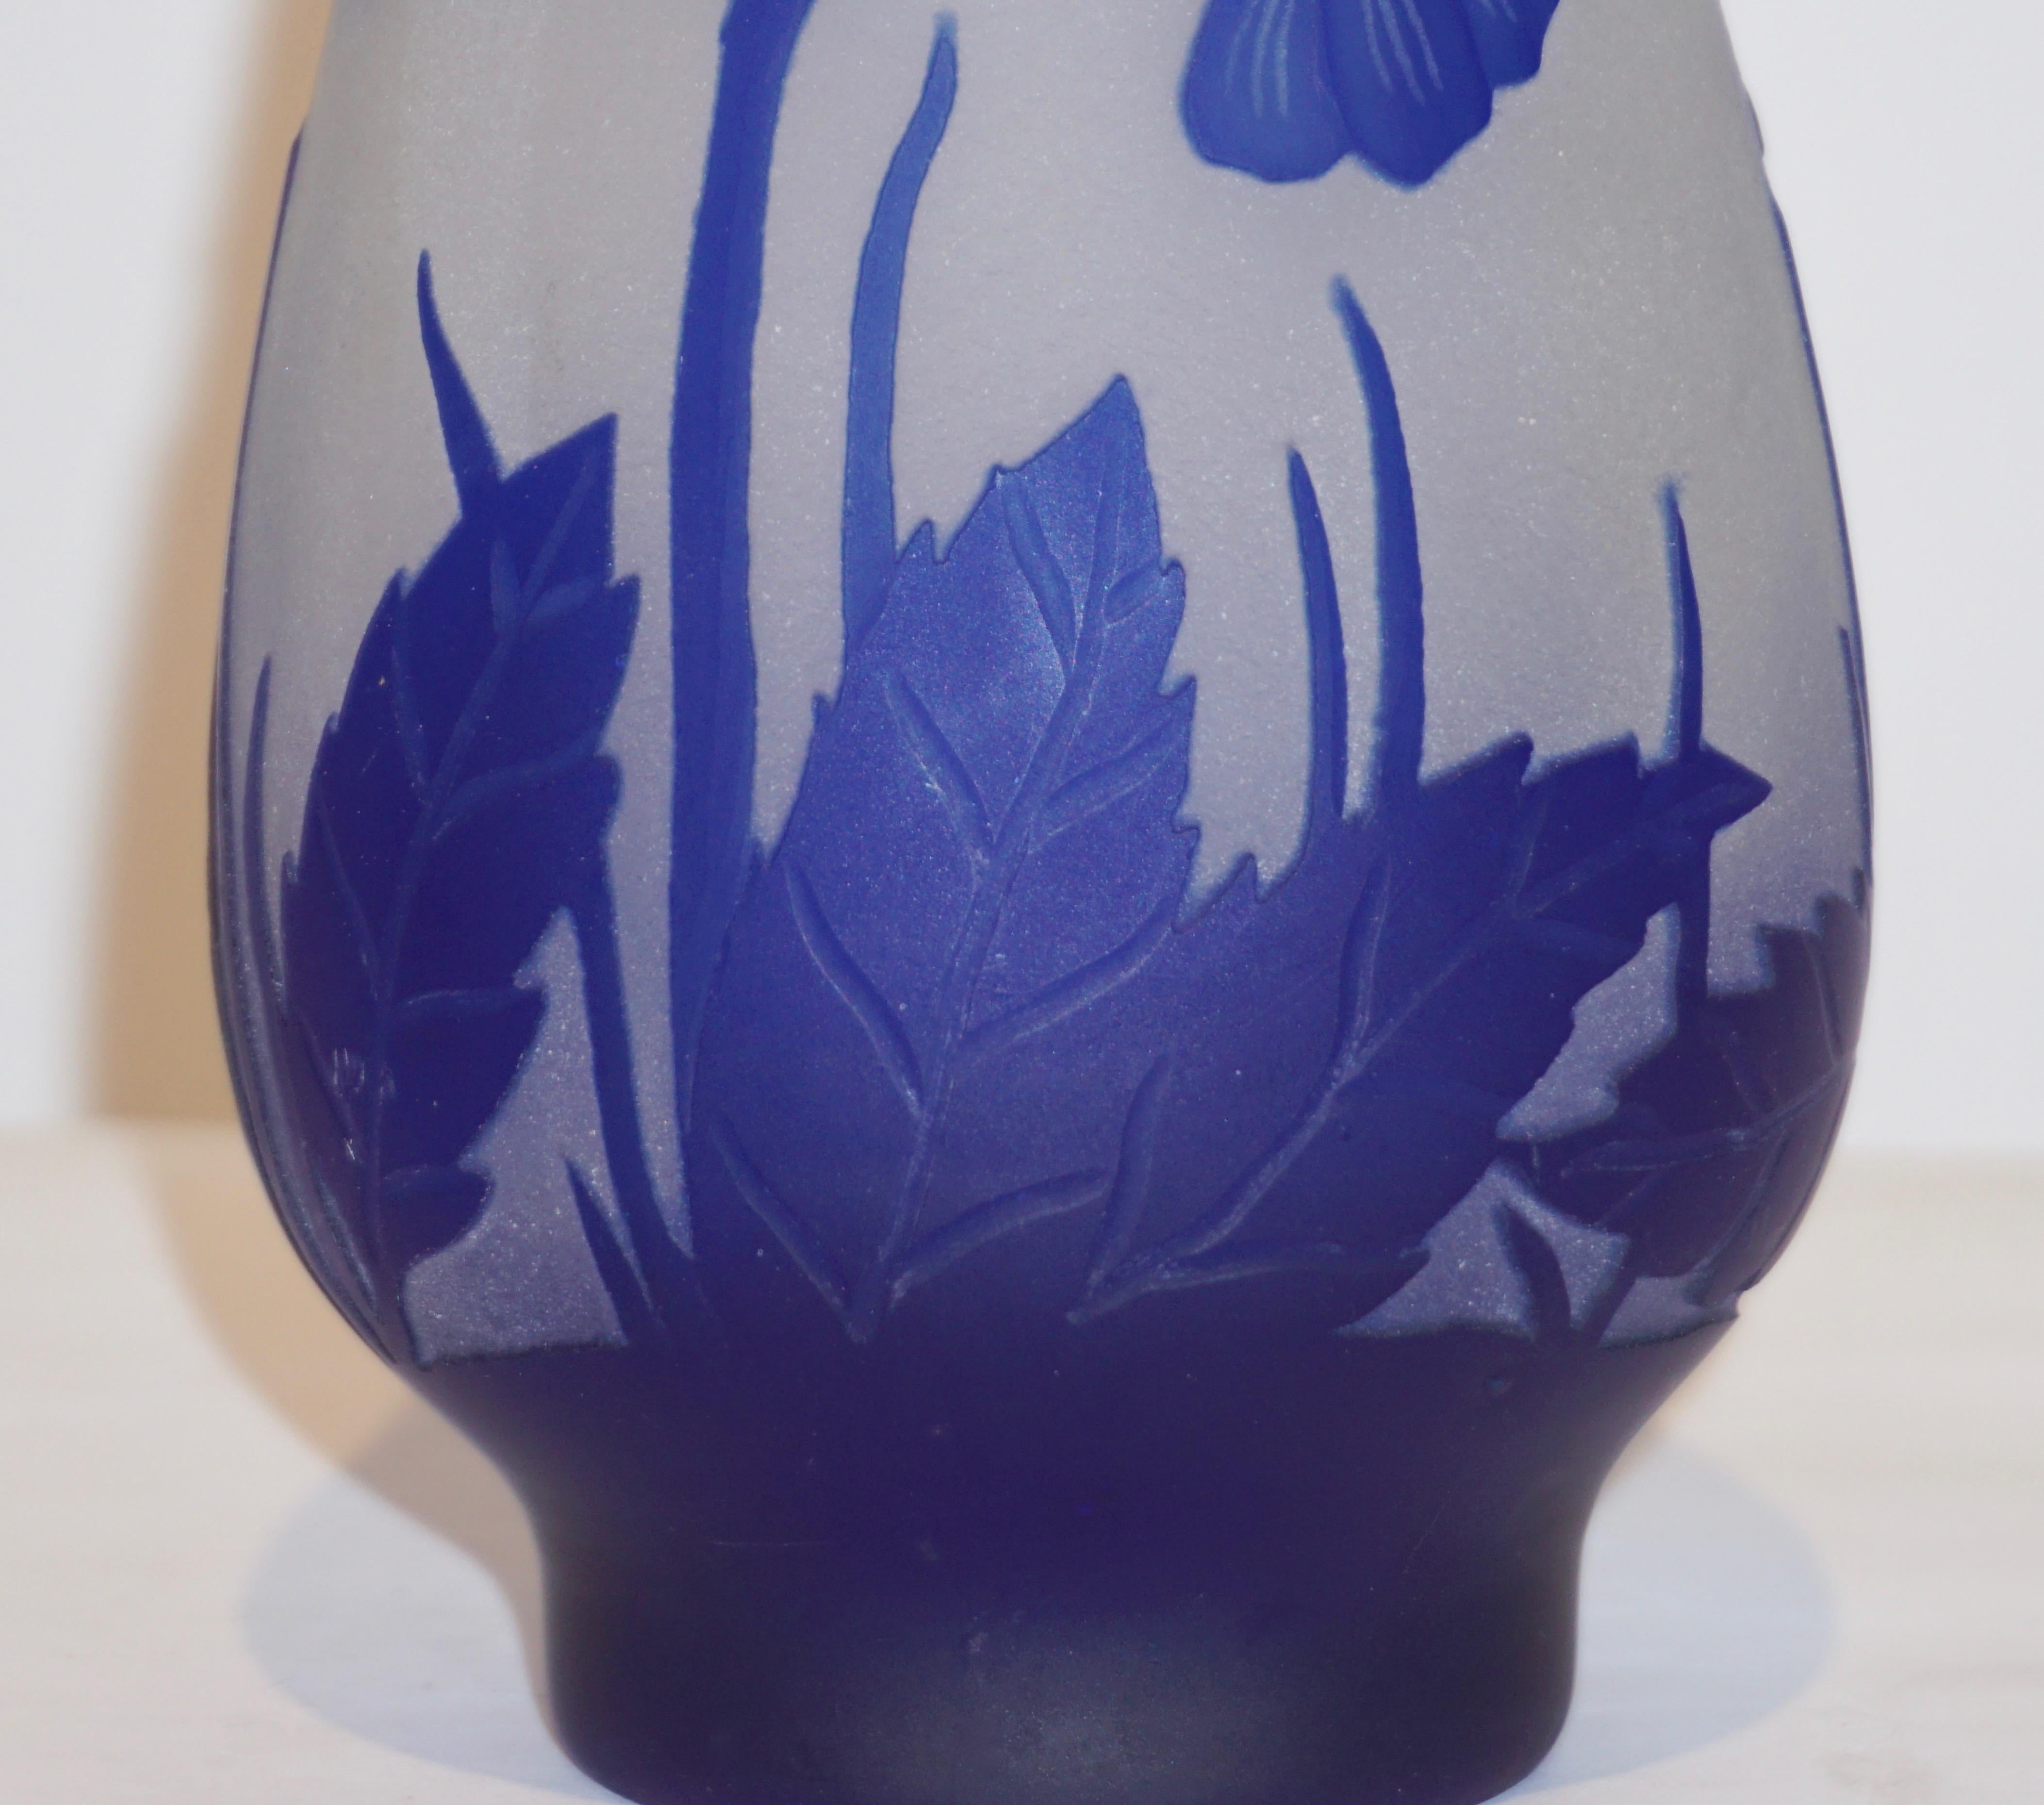 Late 20th Century 1970s Austrian Art Nouveau Style Crystal Glass Vase with Blue Flax Flowers